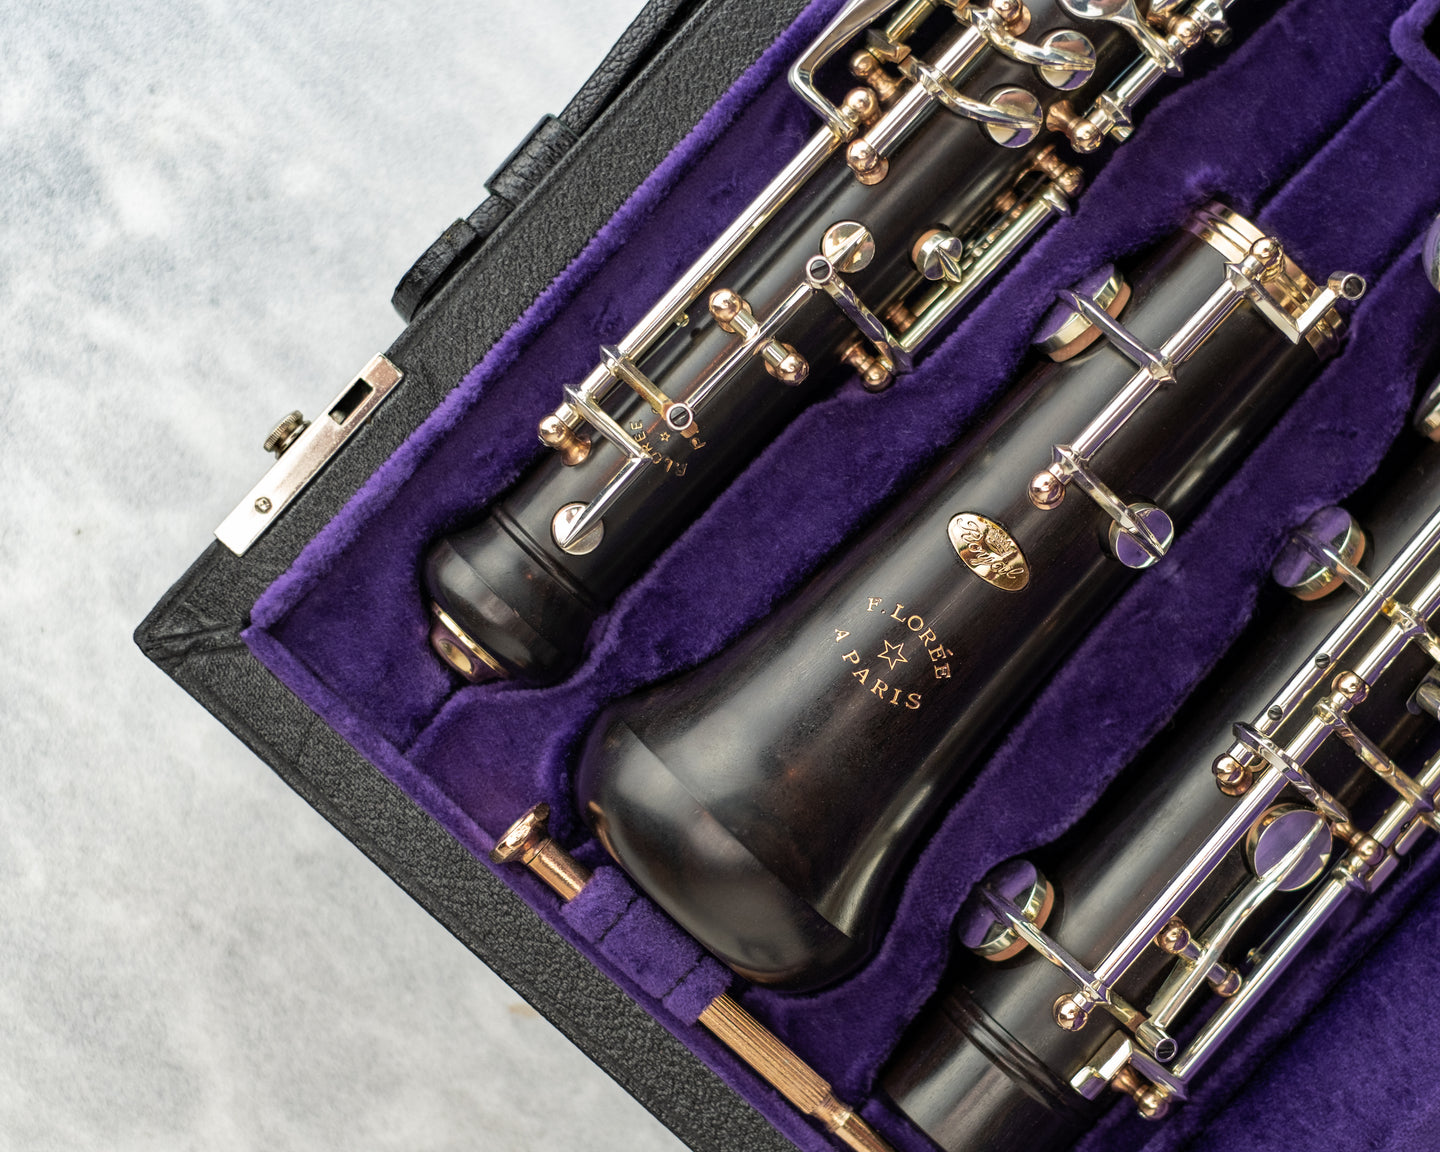 Used Oboes, Clarinets, and Bassoons